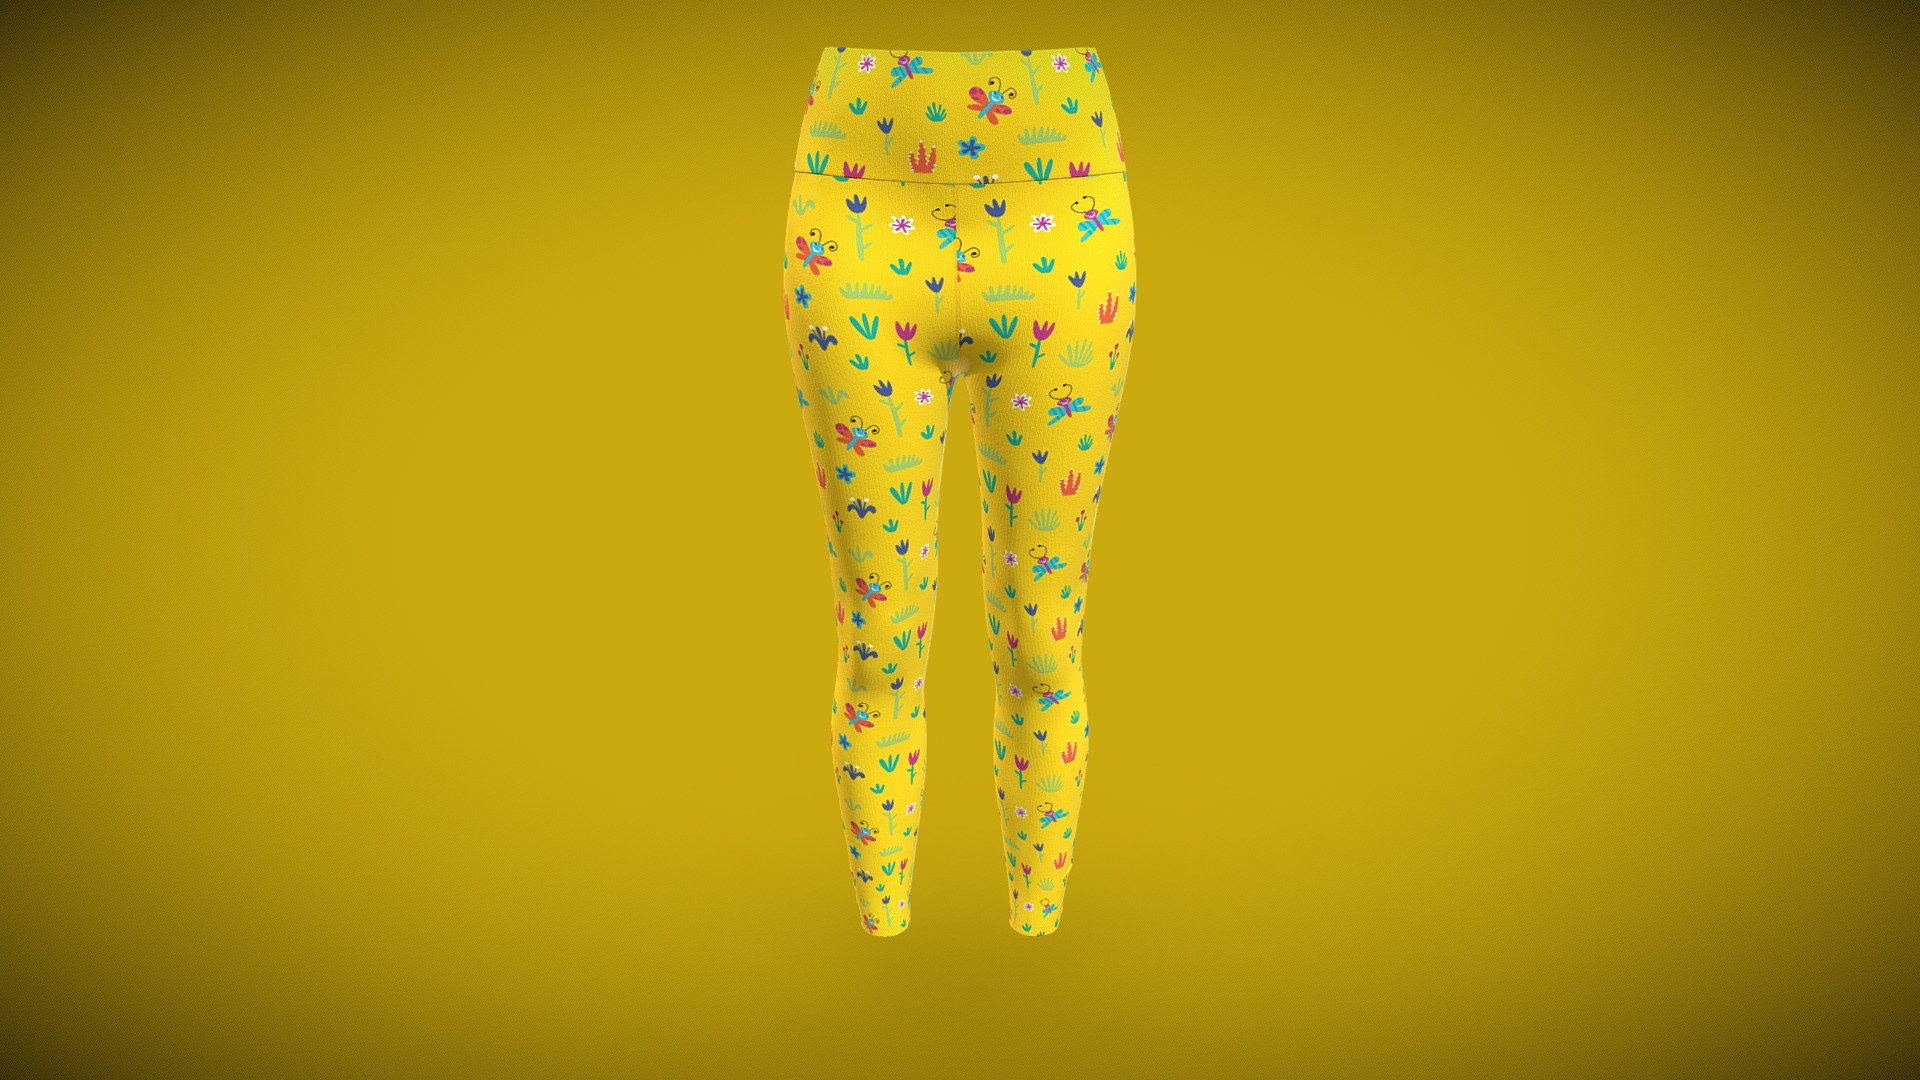 Cloth Title = Yellow Girls Leggings Outfit 

SKU = DG100069 

Category = Women 

Product Type = Leggings 

Cloth Length = Regular 

Body Fit = Fitted  

Occasion = Activewear  

Waist Rise = High Rise


Our Services:

3D Apparel Design.

OBJ,FBX,GLTF Making with High/Low Poly.

Fabric Digitalization.

Mockup making.

3D Teck Pack.

Pattern Making.

2D Illustration.

Cloth Animation and 360 Spin Video.
 - Yellow Girls Leggings Outfit - Buy Royalty Free 3D model by Digital Fashionwear (DF) (@digitalfashionwear) 3d model